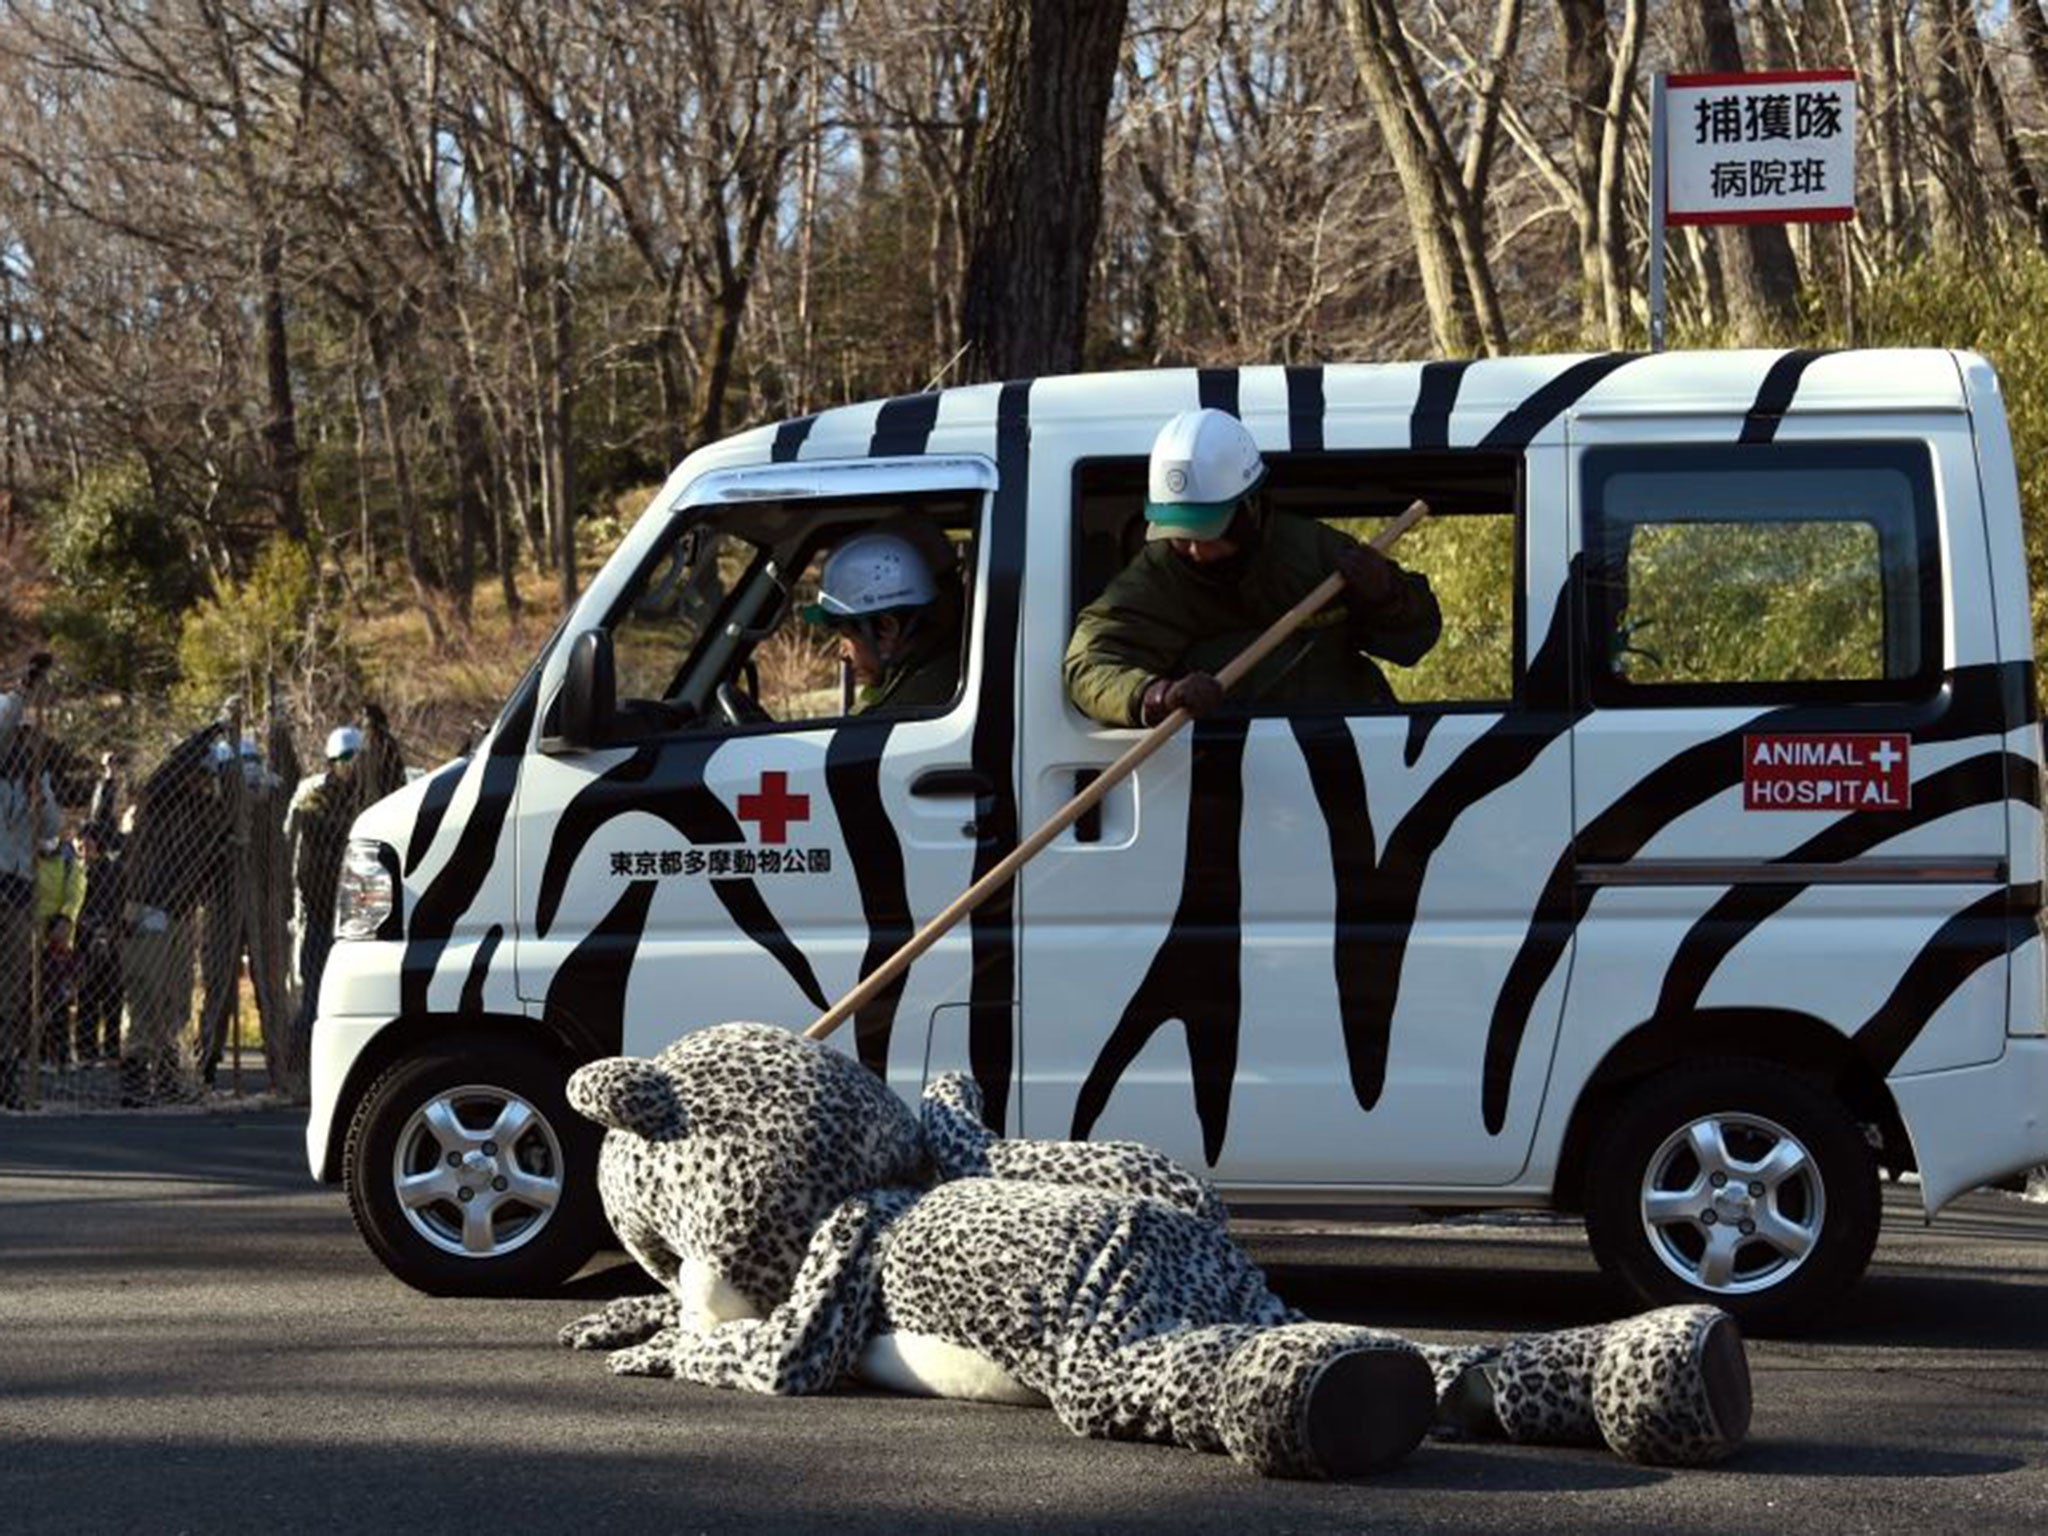 Zoo staff prod the head of the leopard to check it is sedated